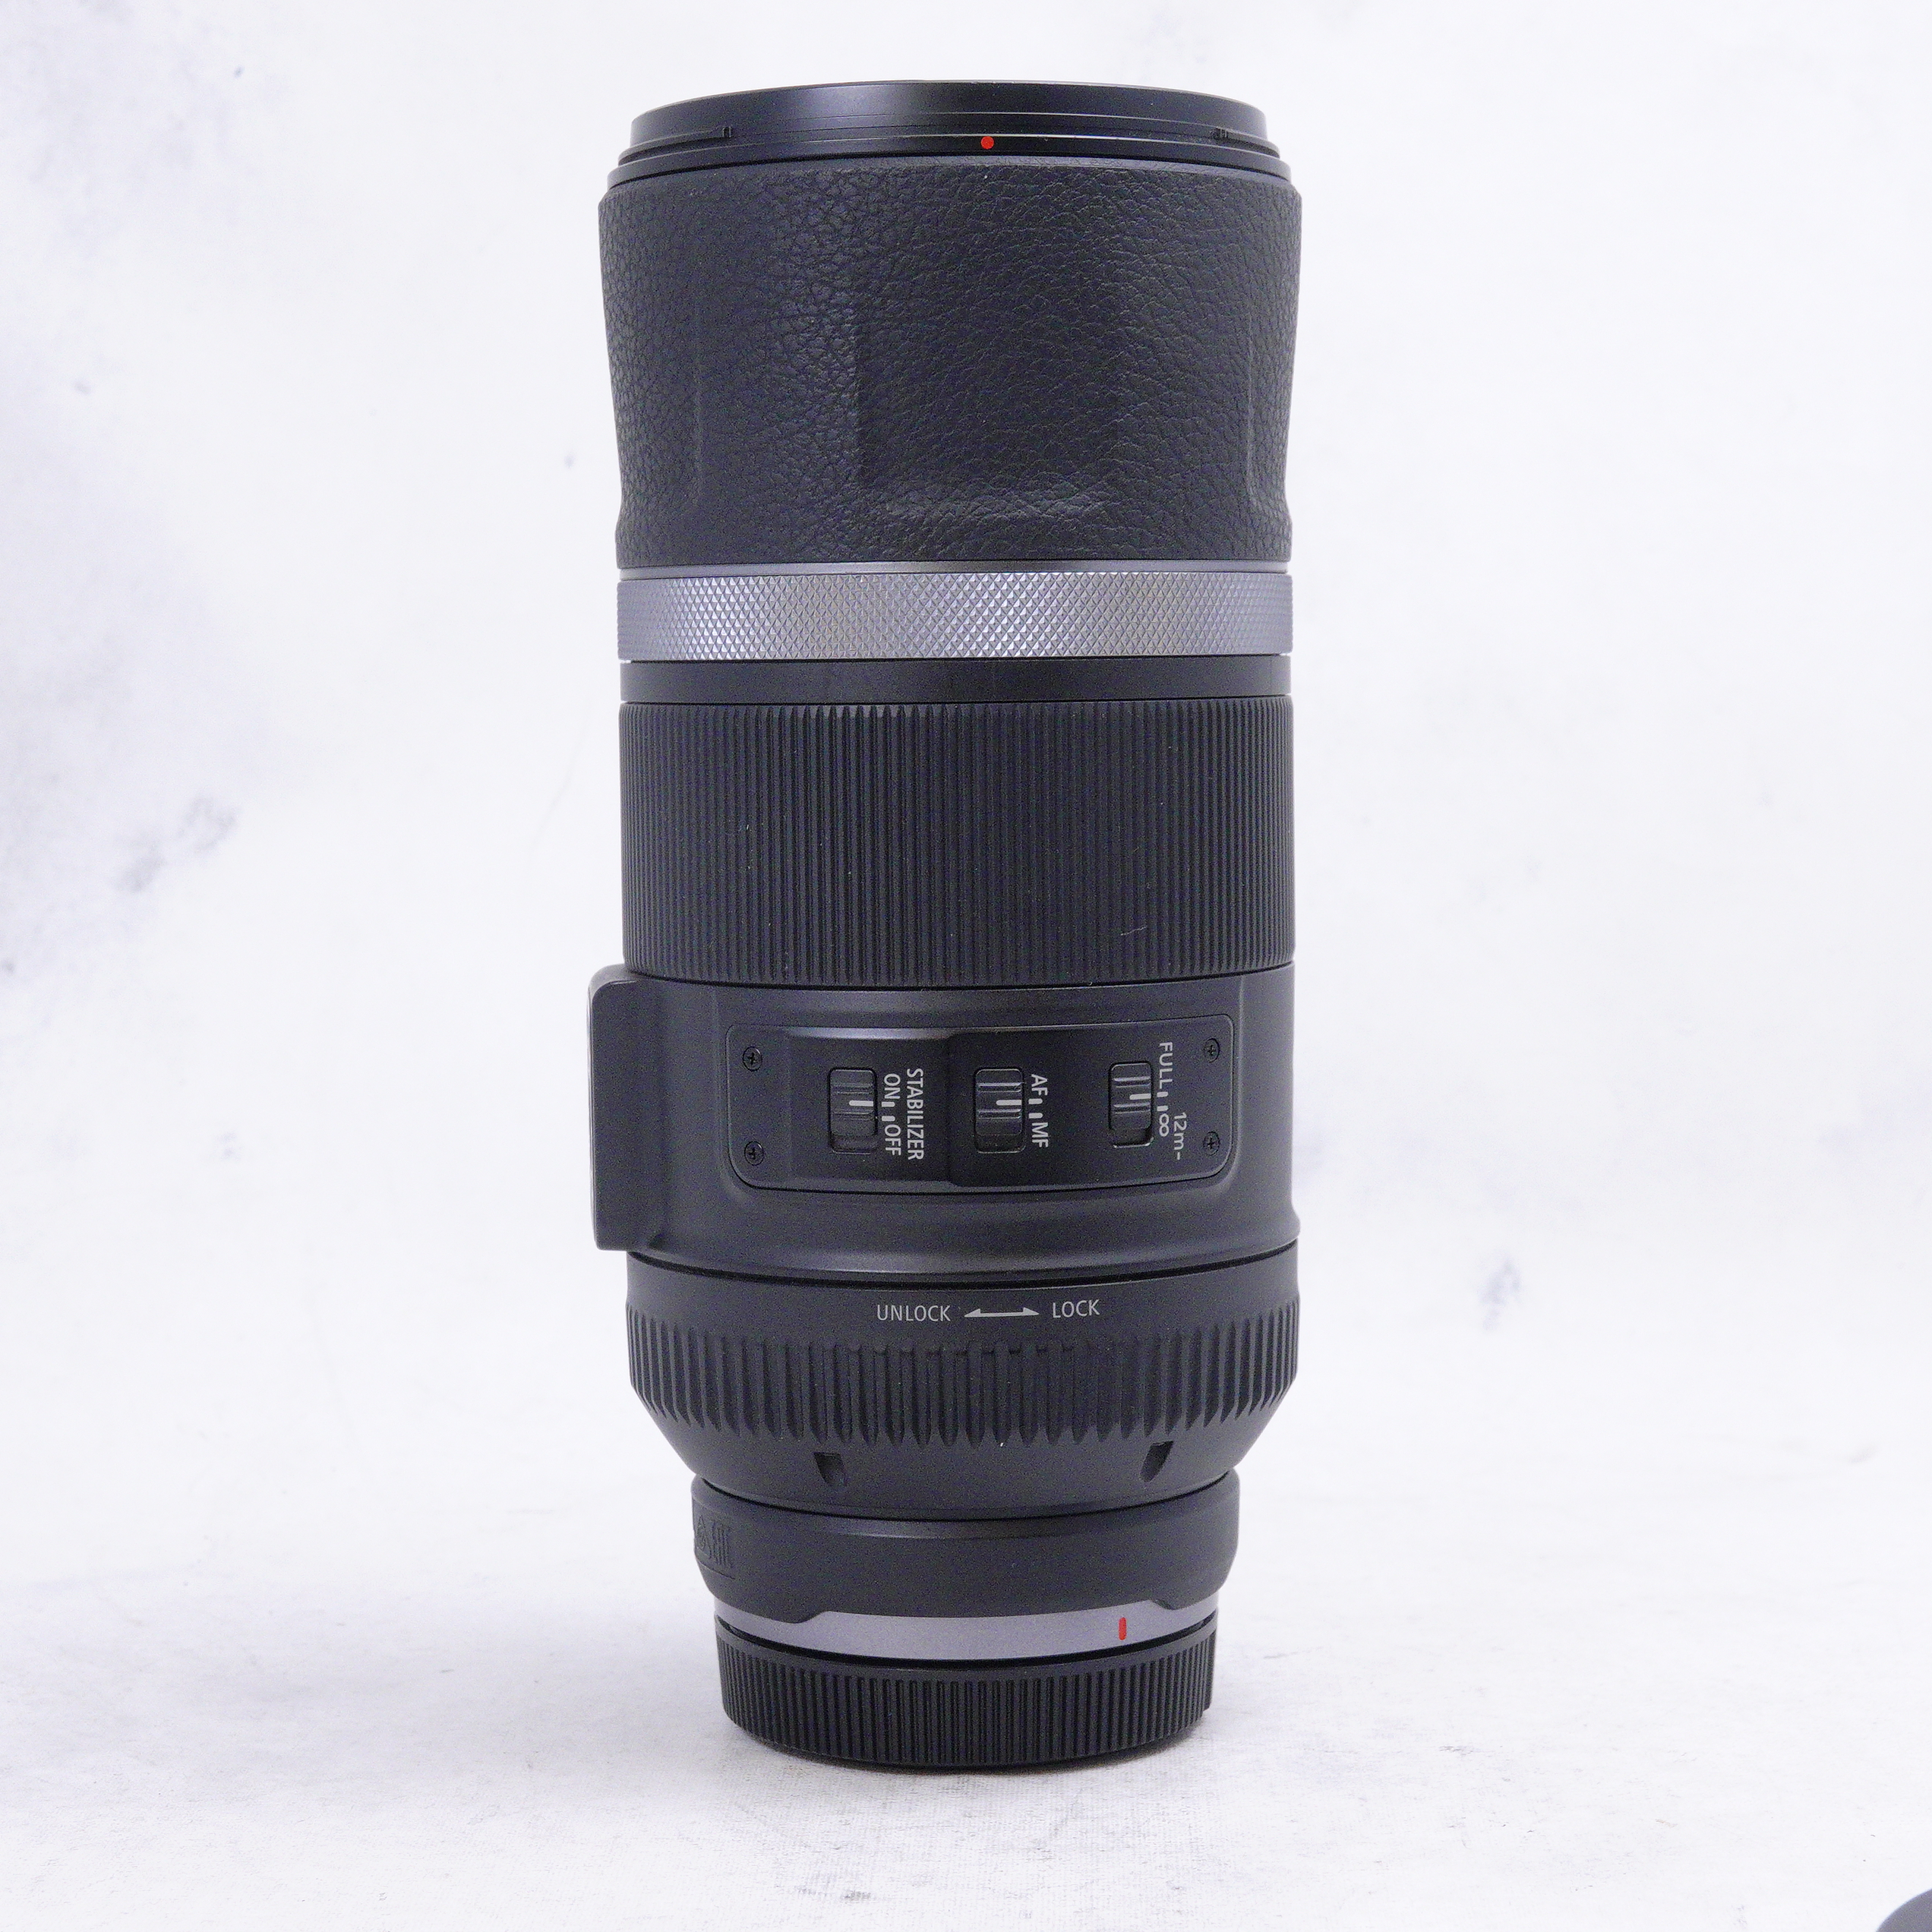 Canon RF 600mm f11 IS STM - Usado